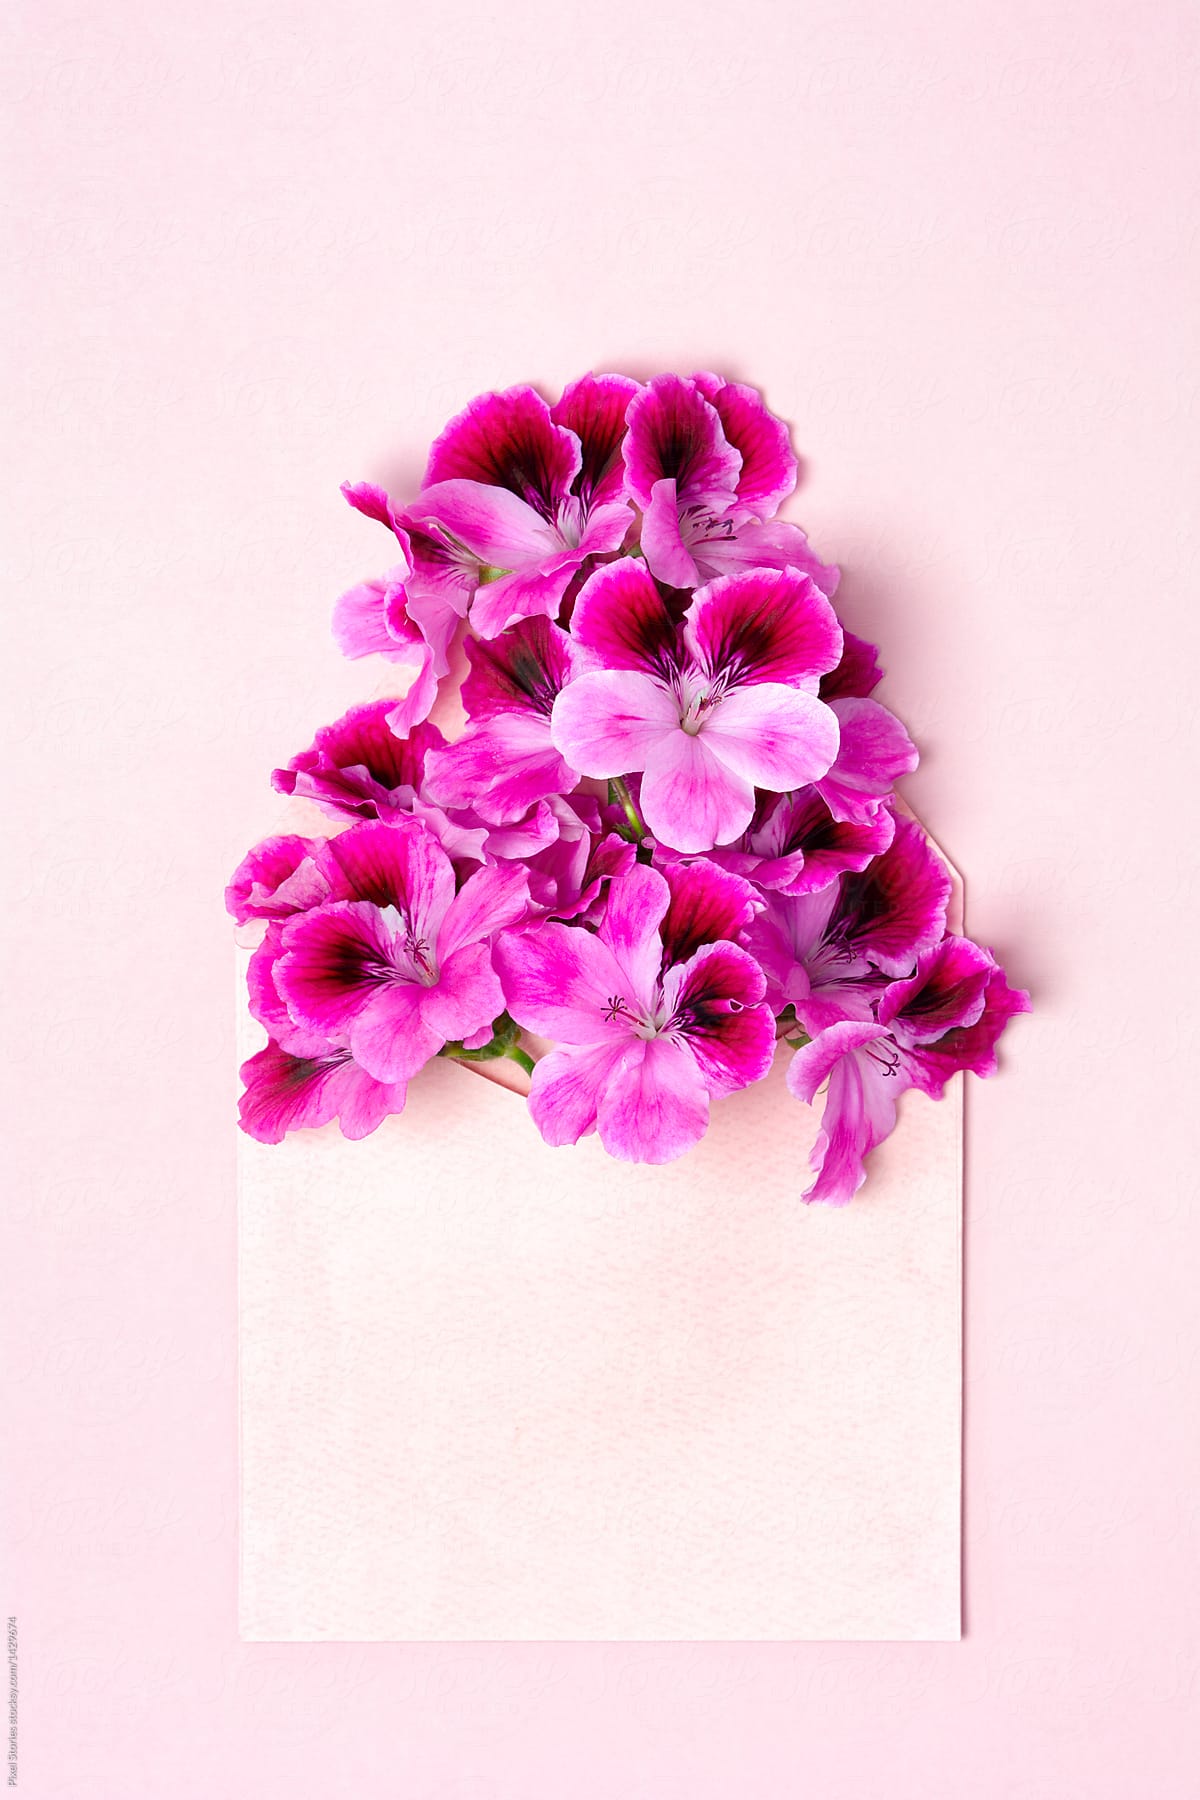 Geranium flowers in an envelop with plenty of copy space